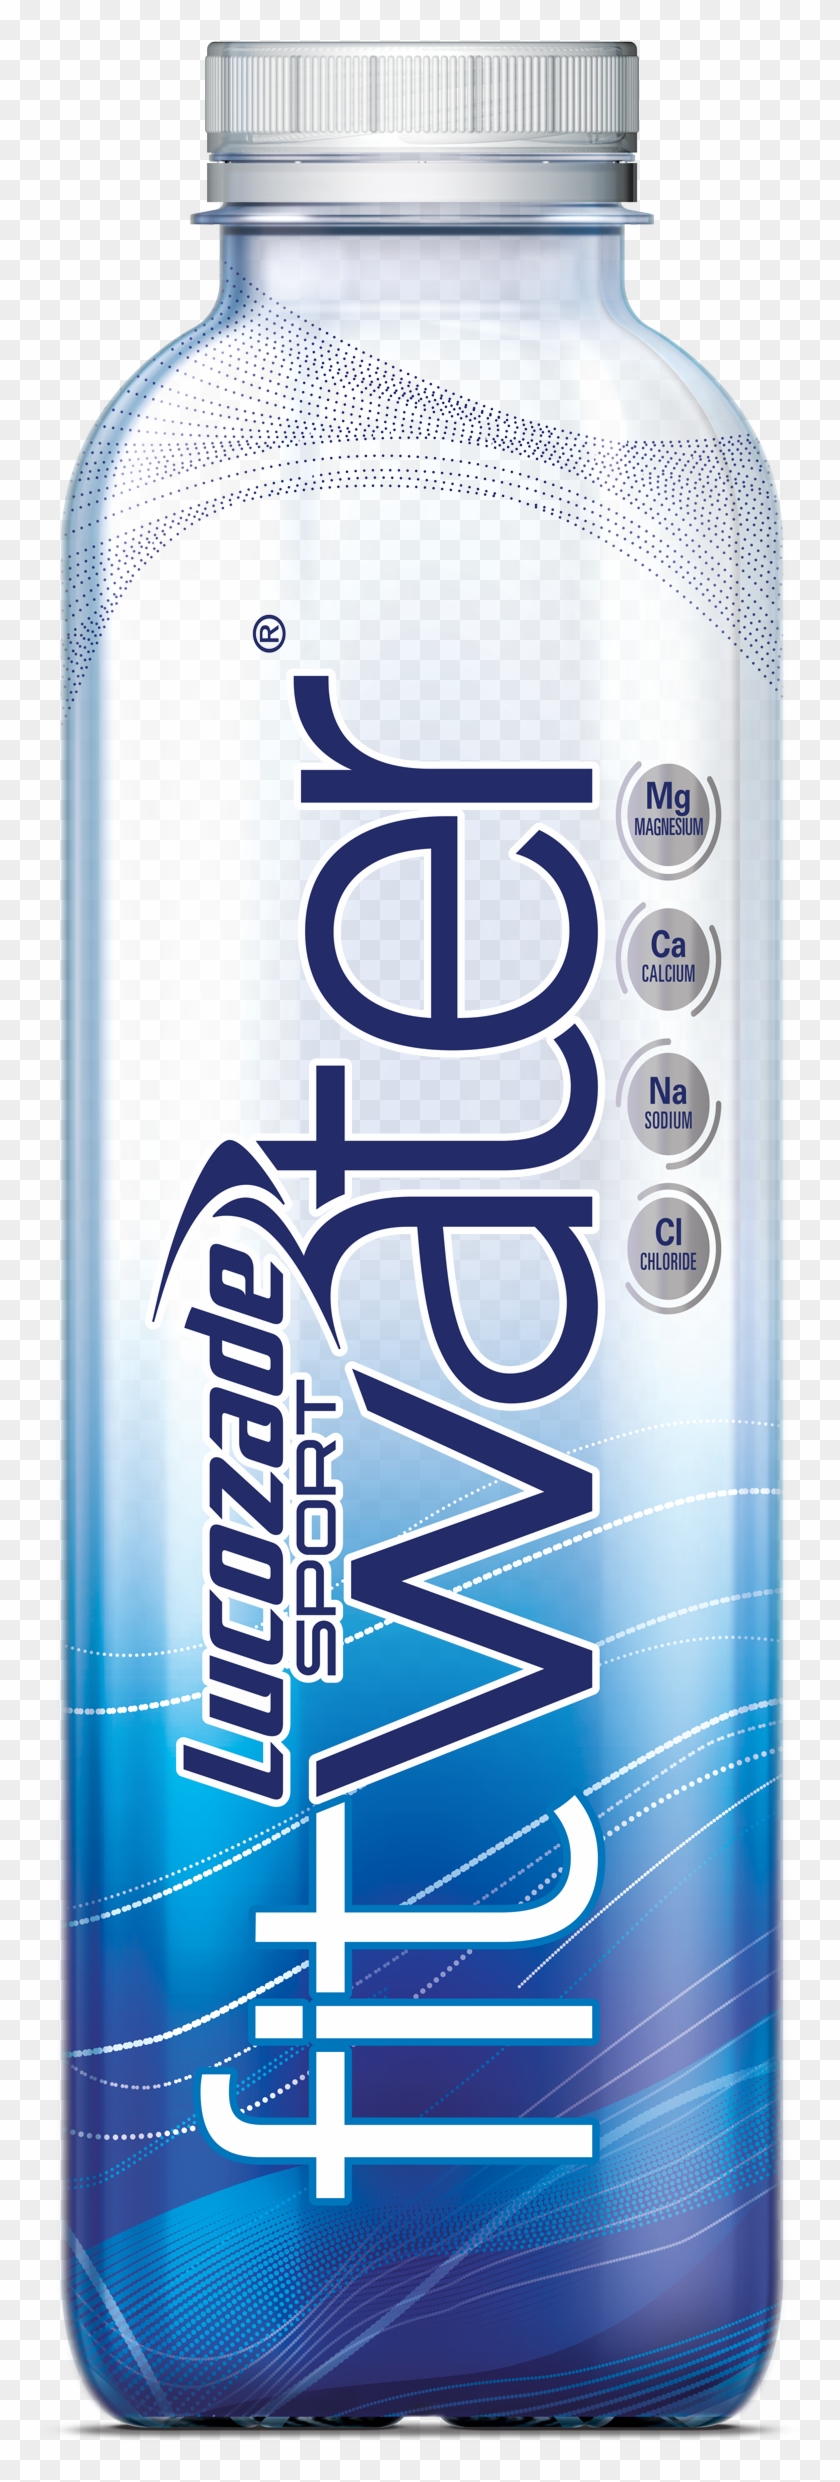 Lucozade Fit Water Png #1051138